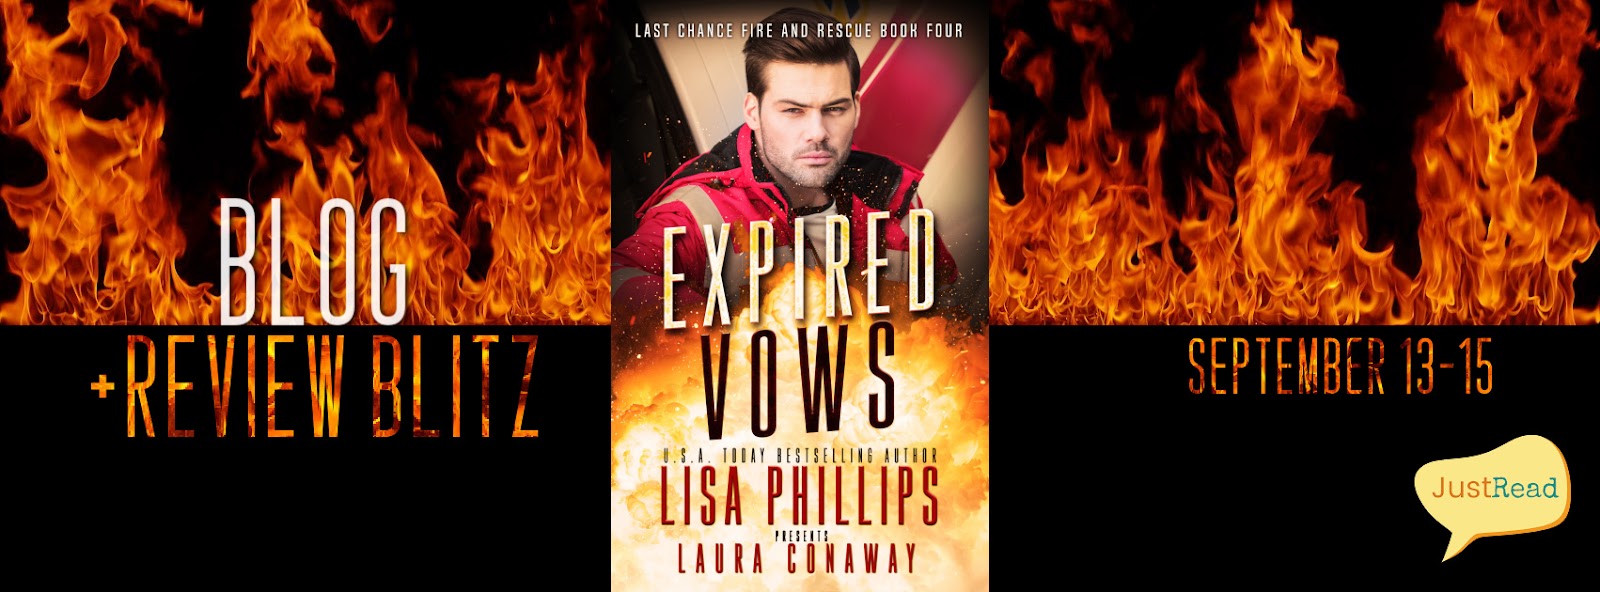 Expired Vows JustRead Blog + Review Blitz